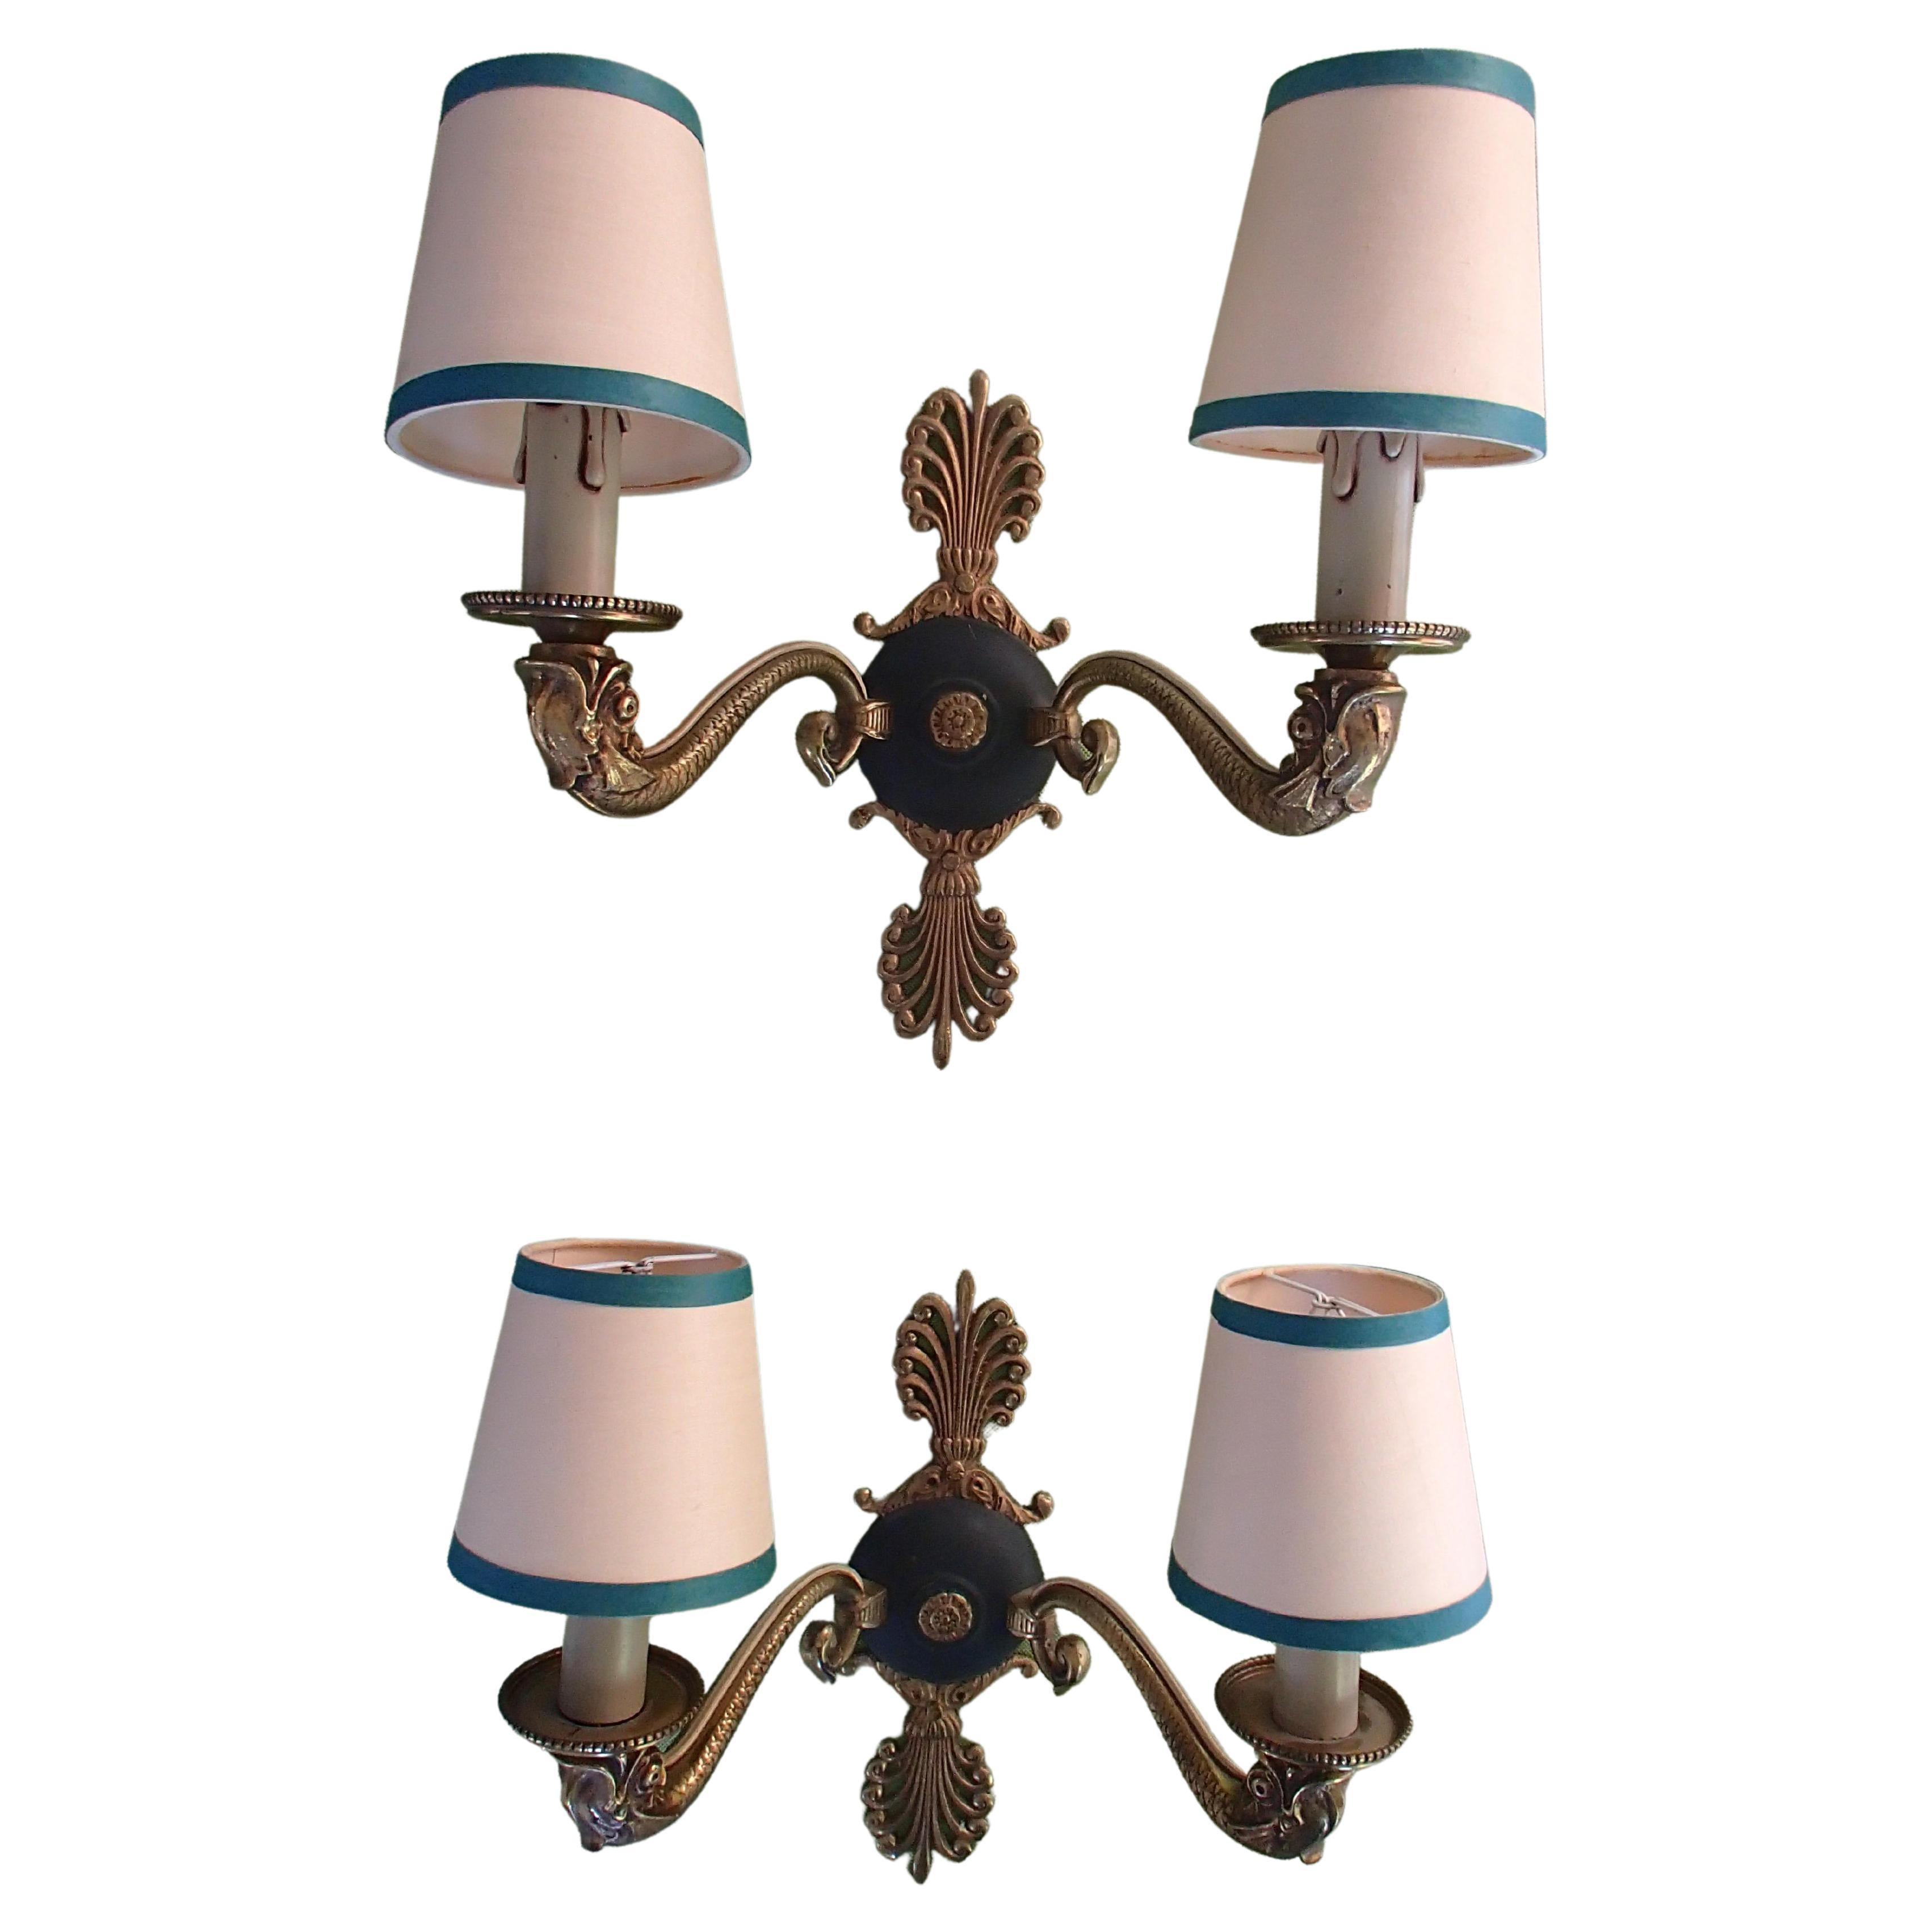 Pair of Bronze and Green Empire Wall Lights with Beige/Green Shades